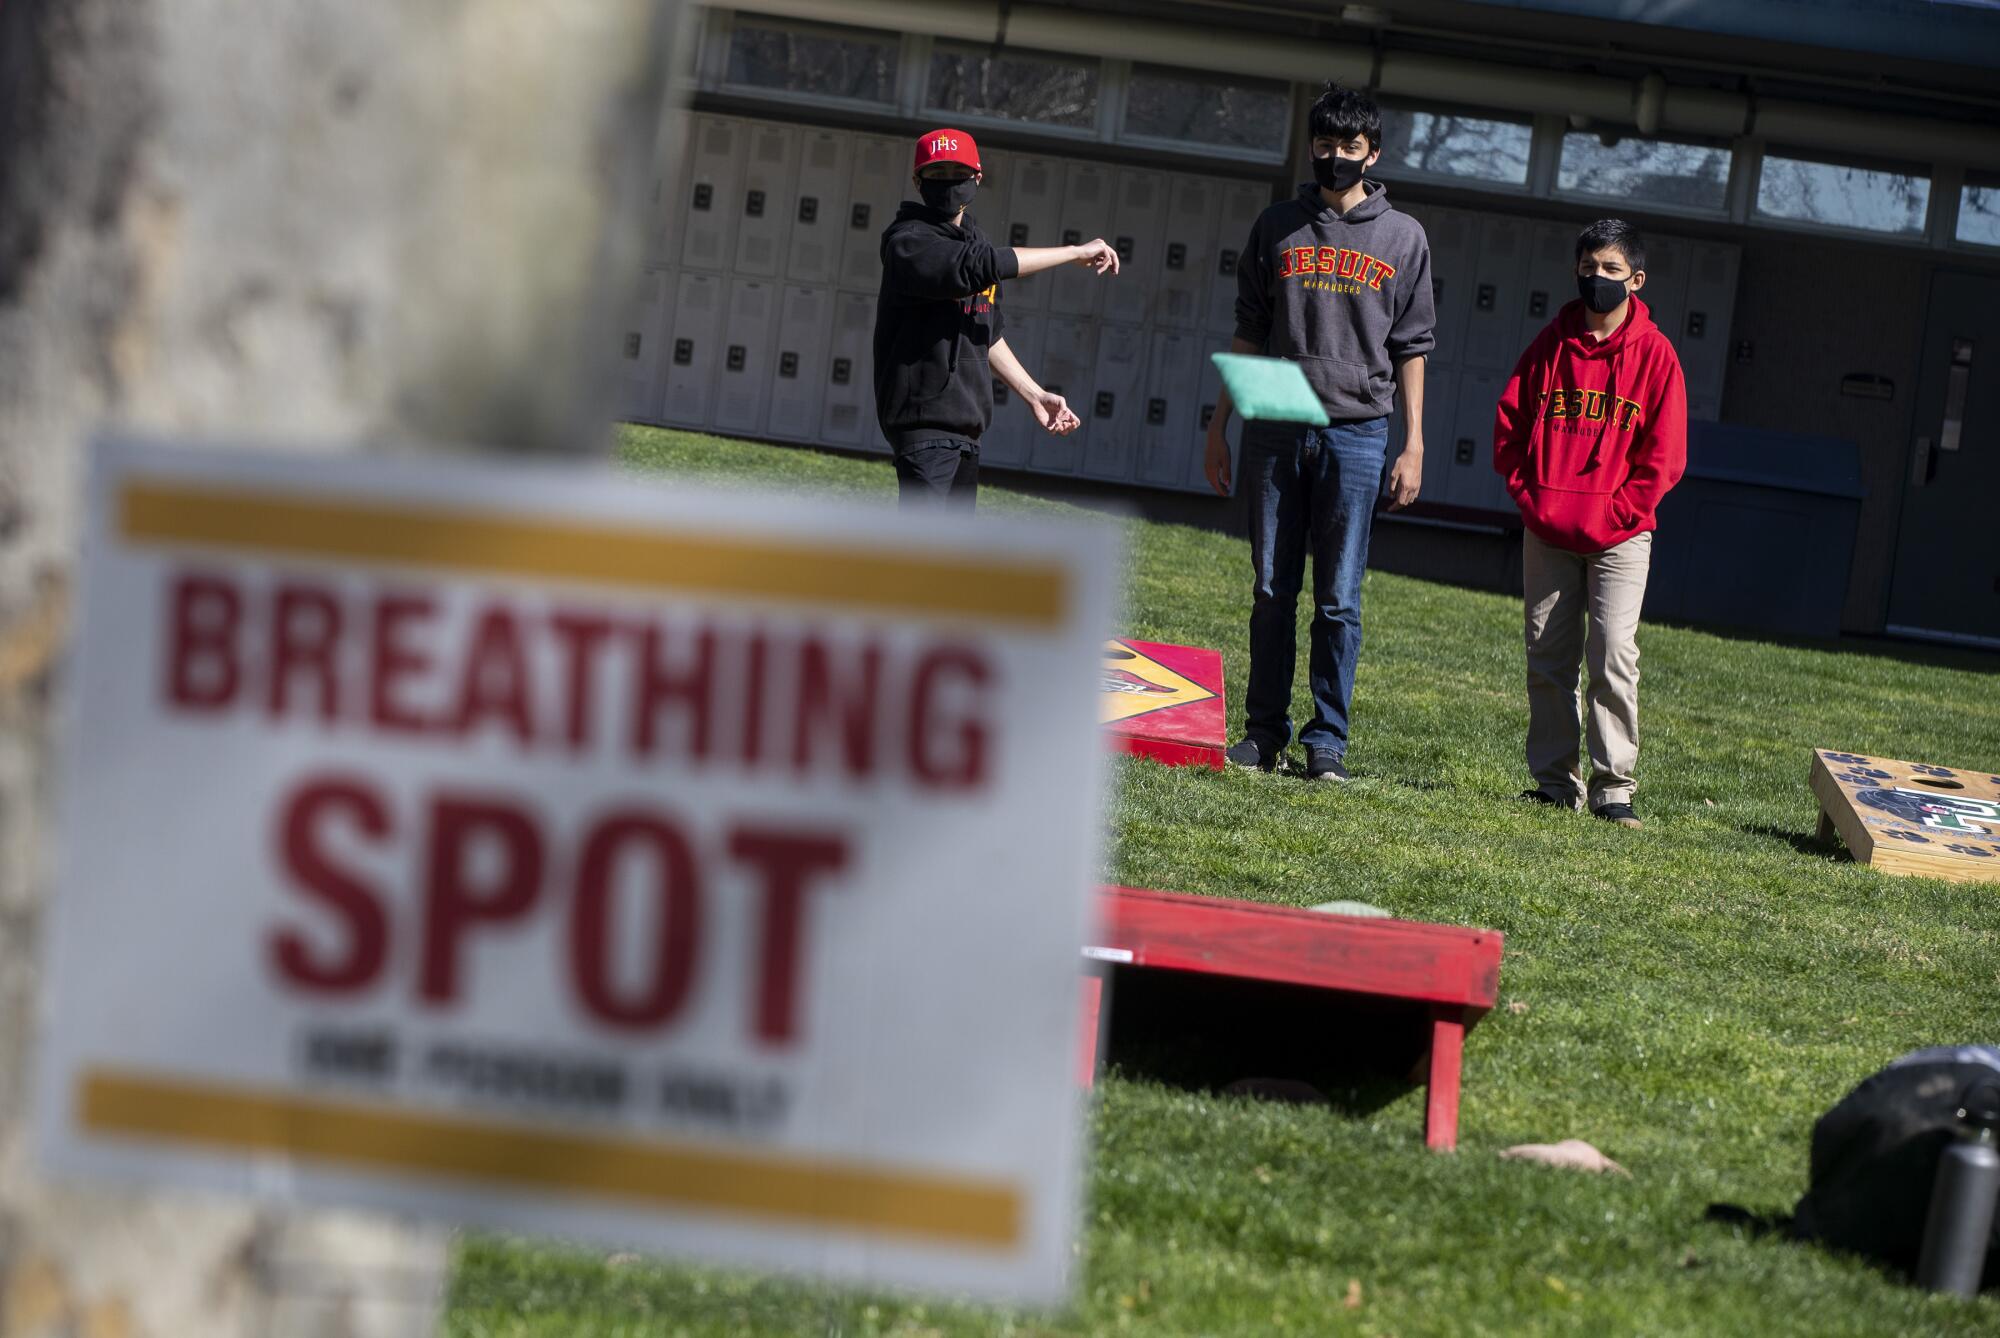 High school students toss cornhole bags in a lawn next to a sign that says Breathing Spot